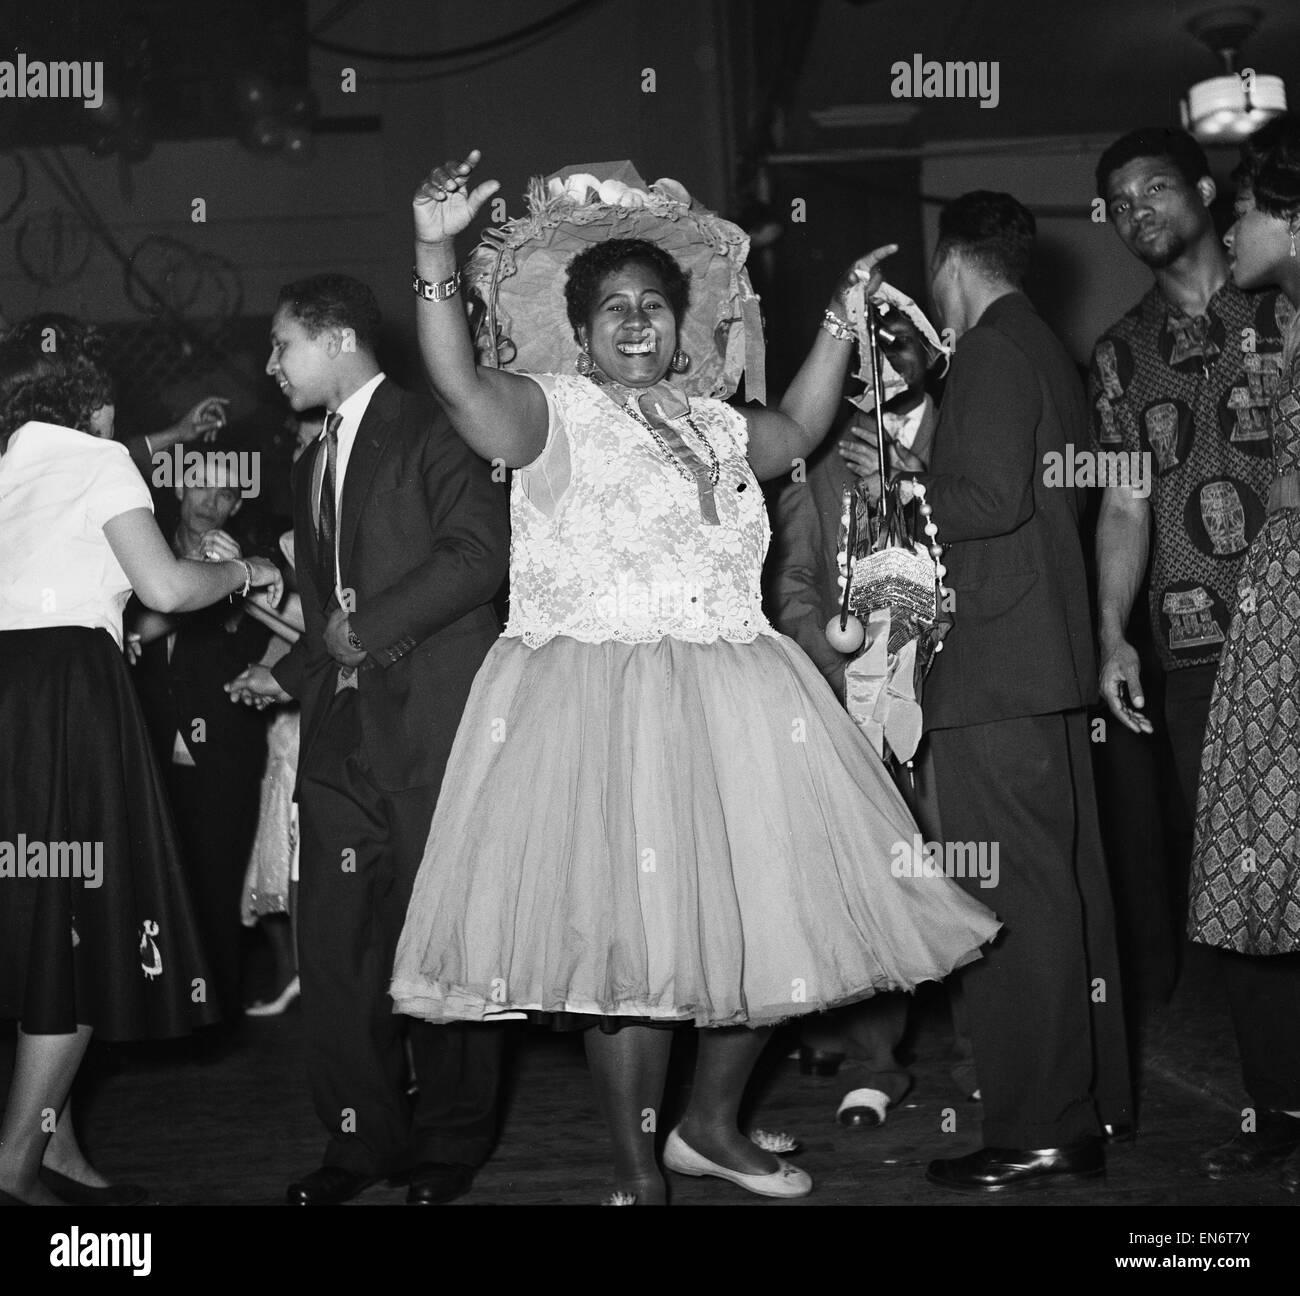 The first ever "Notting Hill carnival", created in response to the previous year's racial riots in the area and the state of race relations at the time. The carnival, organised by Claudia Jones, was known as the Caribbean carnival or the West Indian Gazet Stock Photo